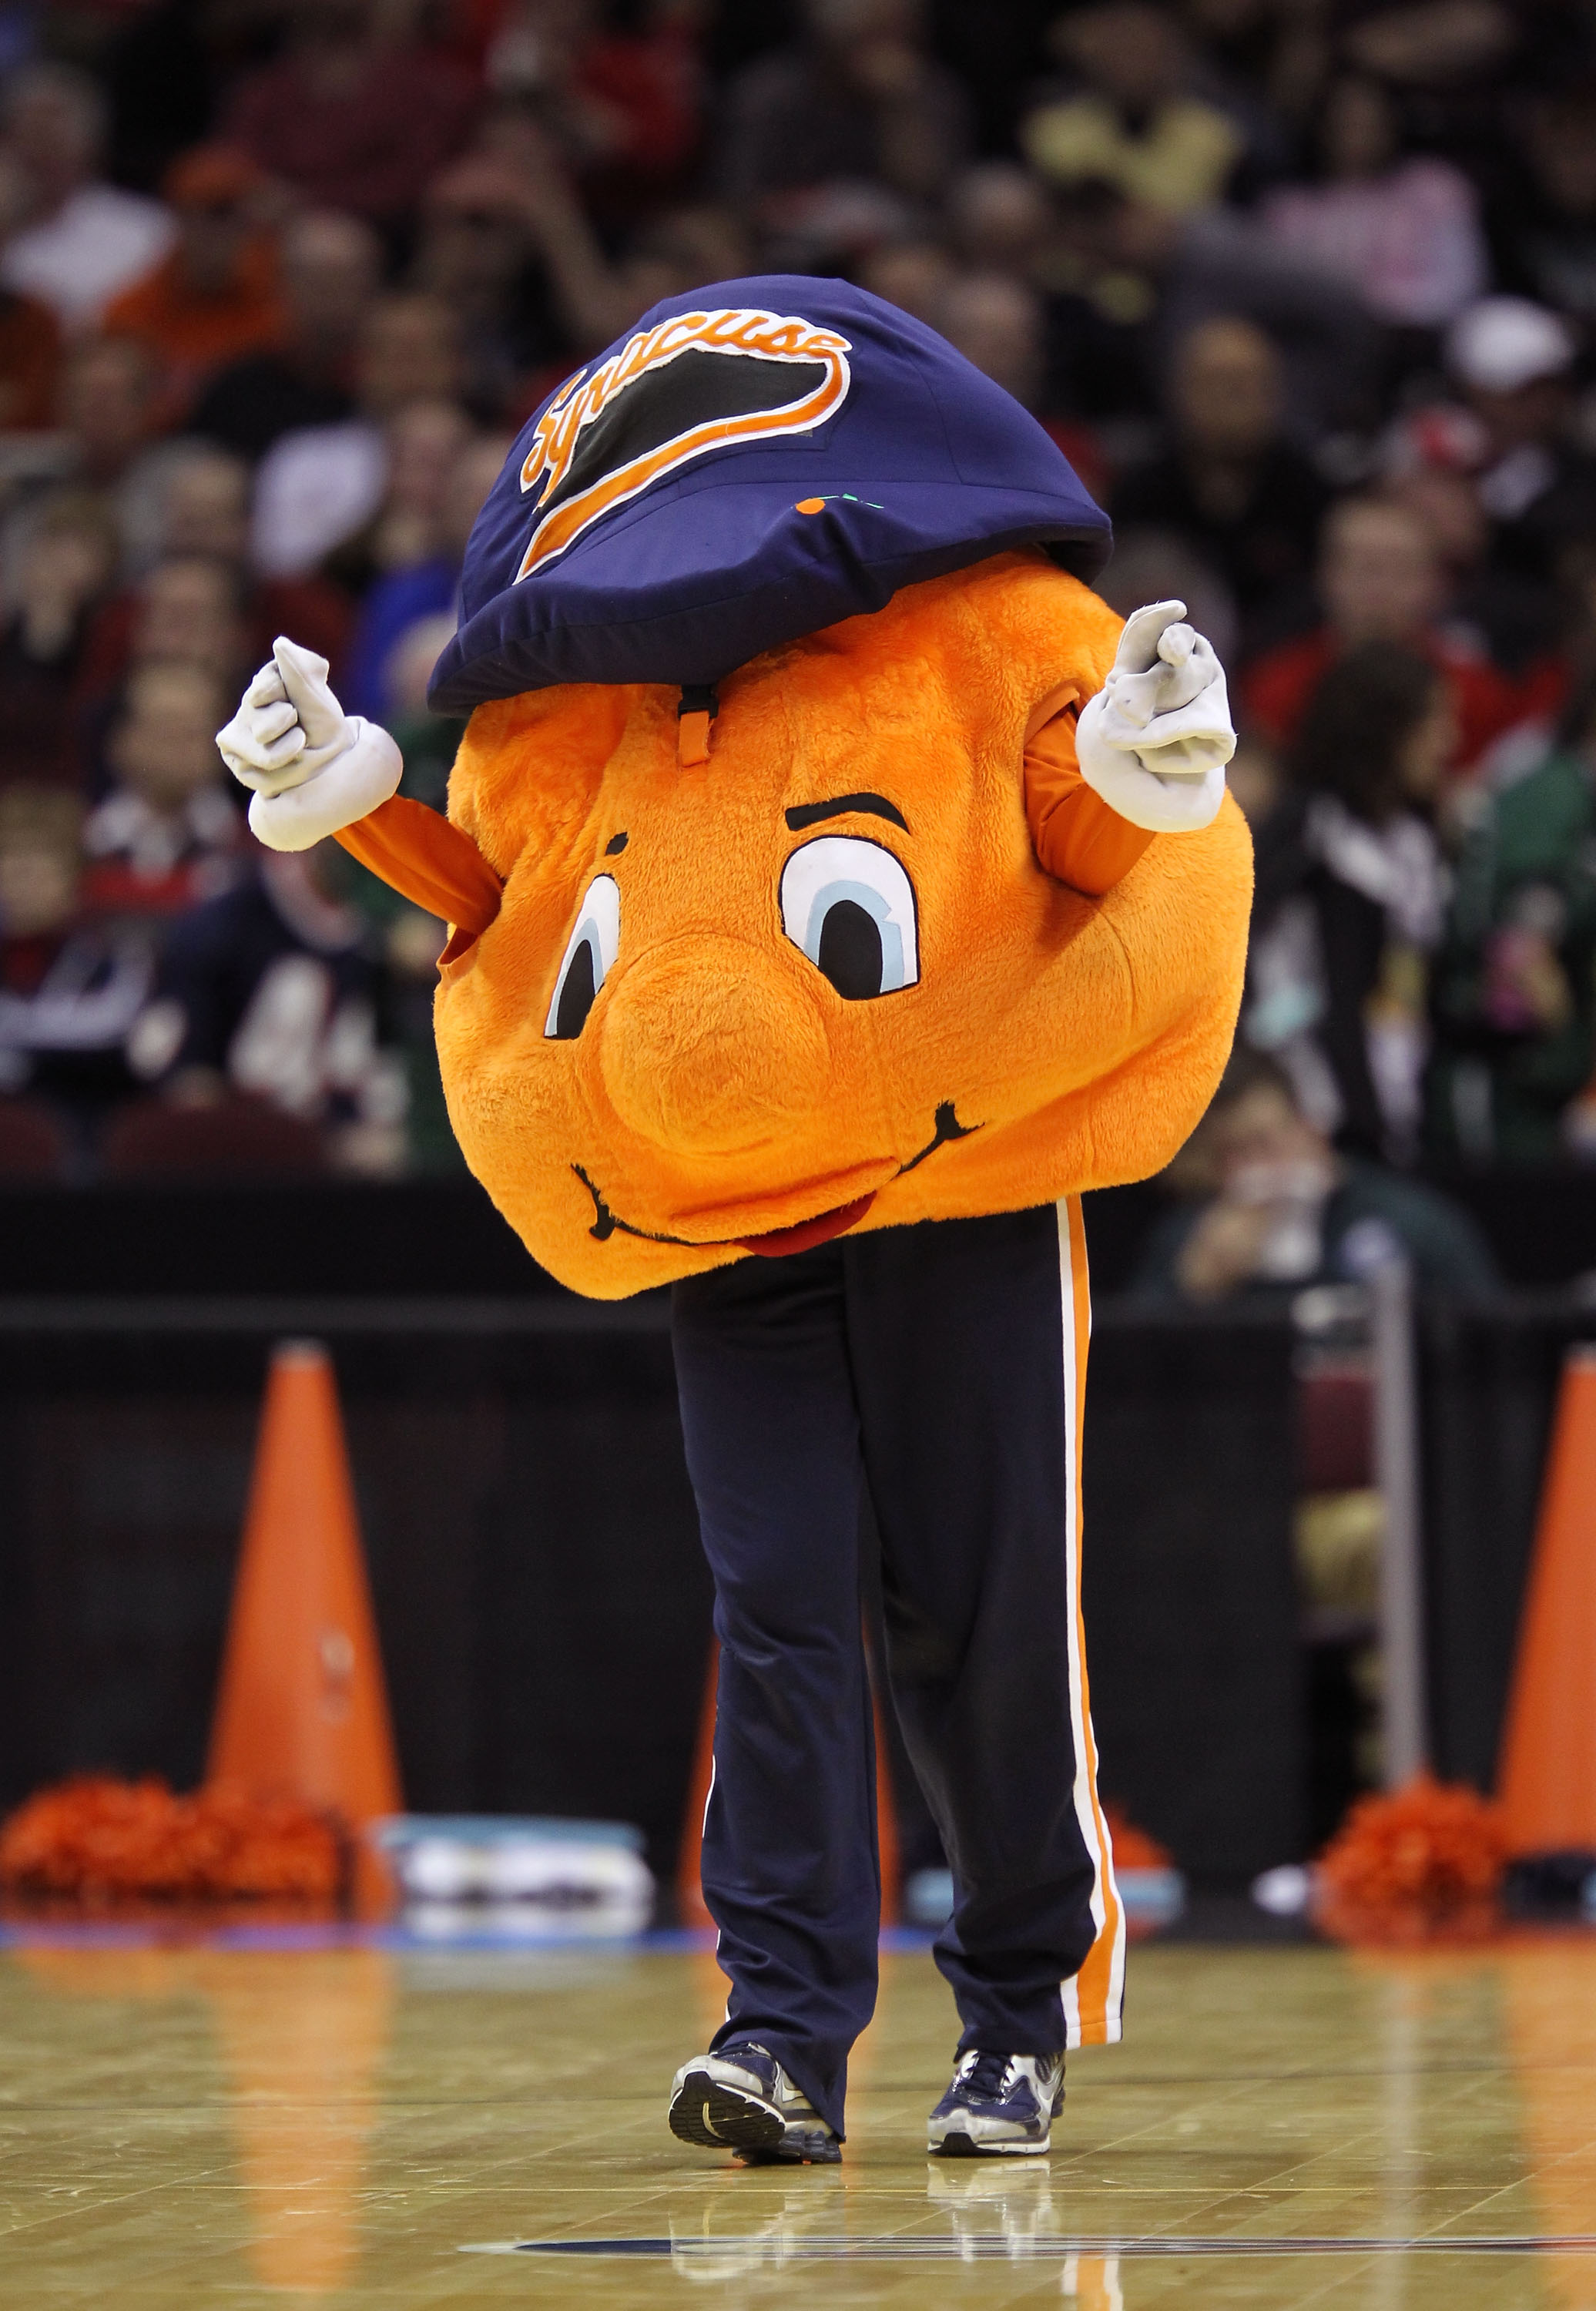 CLEVELAND, OH - MARCH 20: The Syracuse Orange mascot walks on the court during the game against the Marquette Golden Eagles during the third of the 2011 NCAA men's basketball tournament at Quicken Loans Arena on March 20, 2011 in Cleveland, Ohio.  (Photo